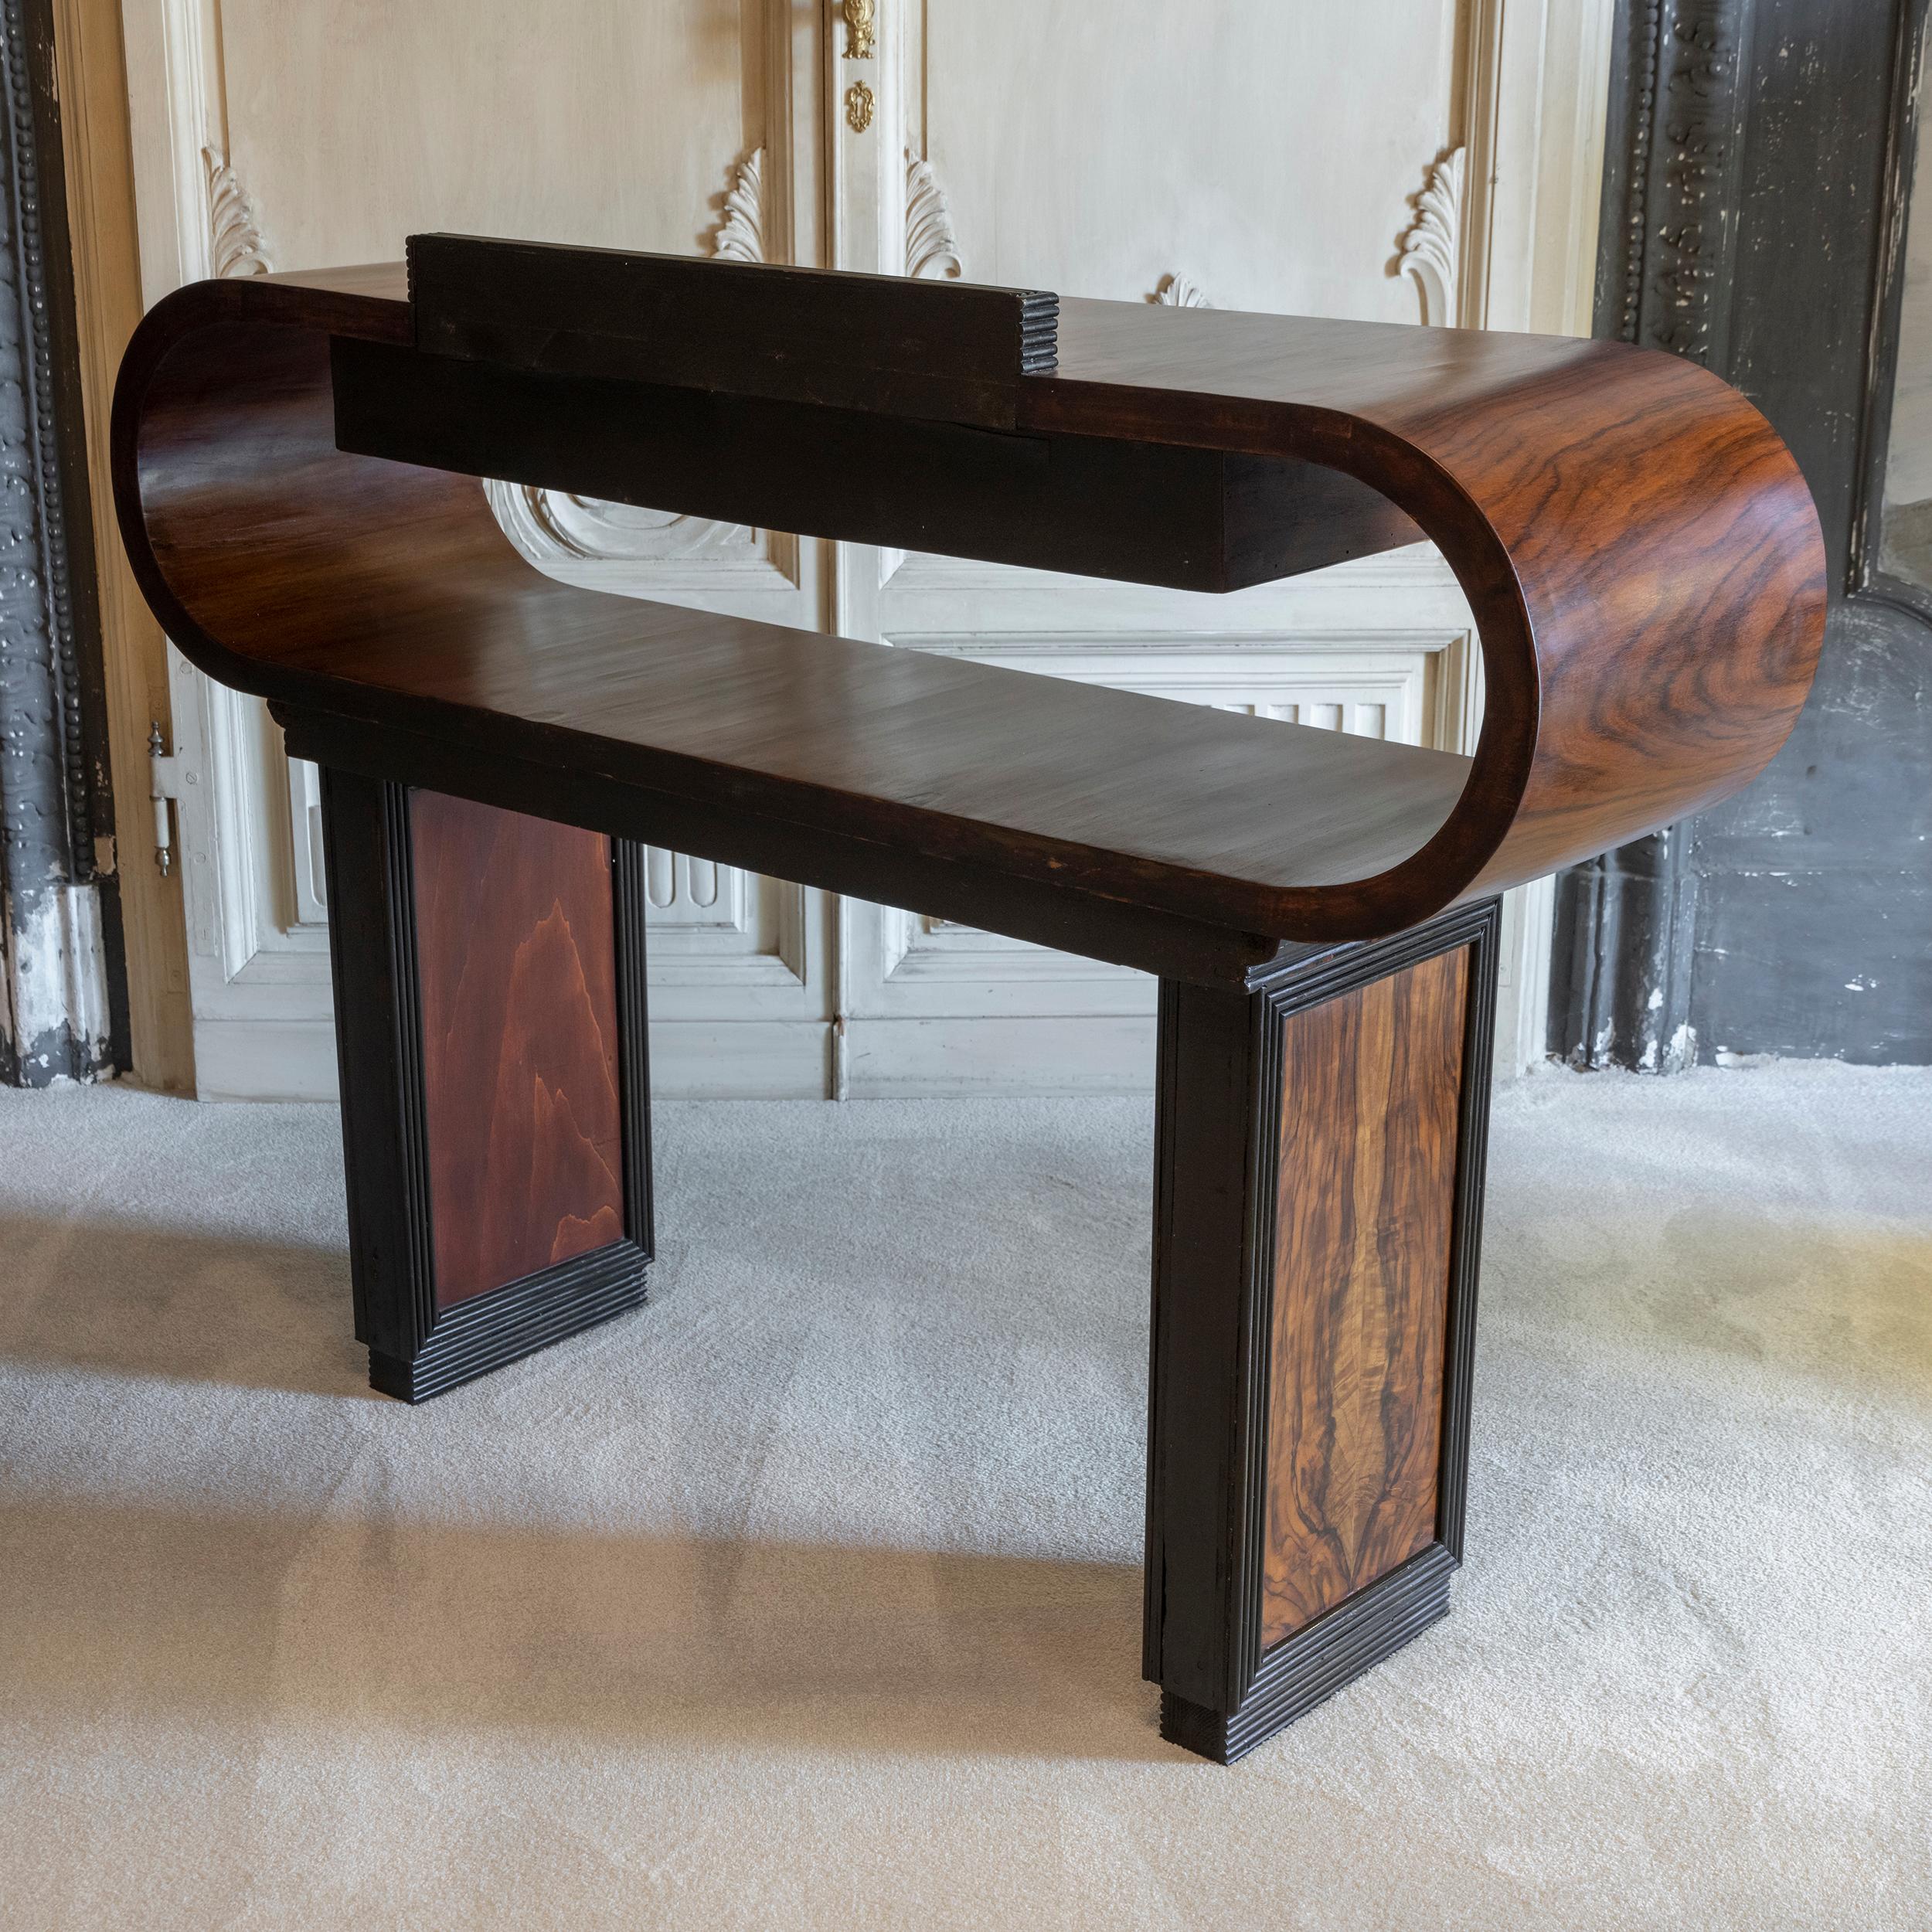 Mid-20th Century 1930s Italian Deco Console Table with Drawers Palisander, Mahogany and Walnut For Sale